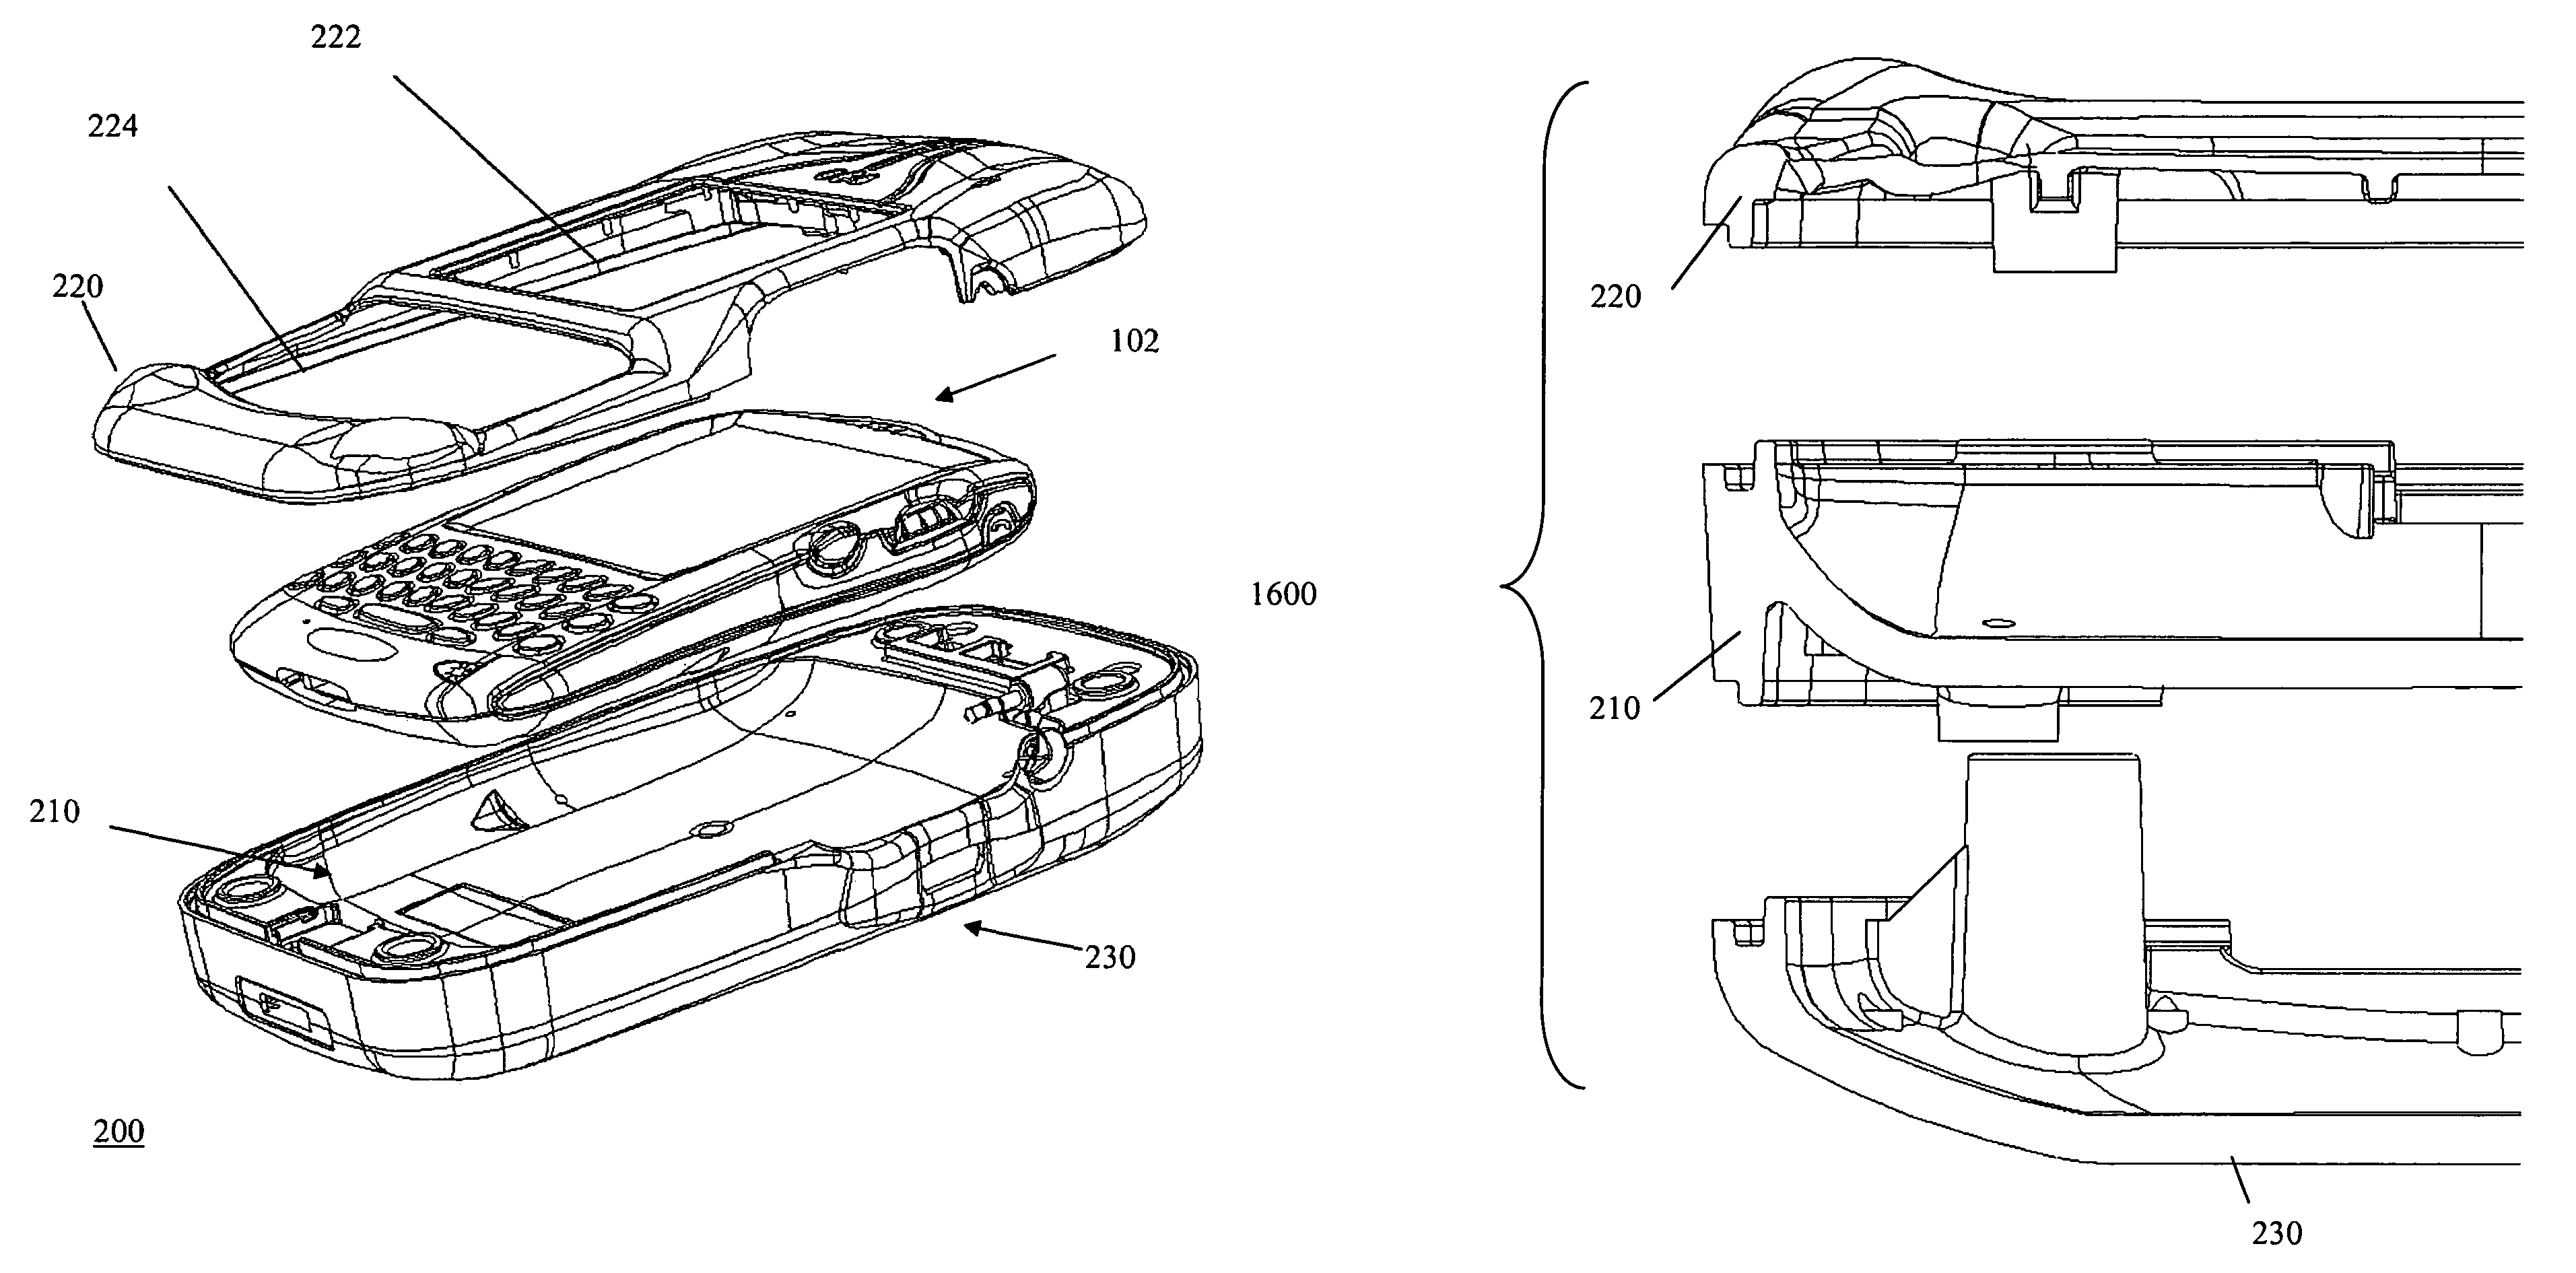 Modular protective housing with peripherals for a handheld communications device